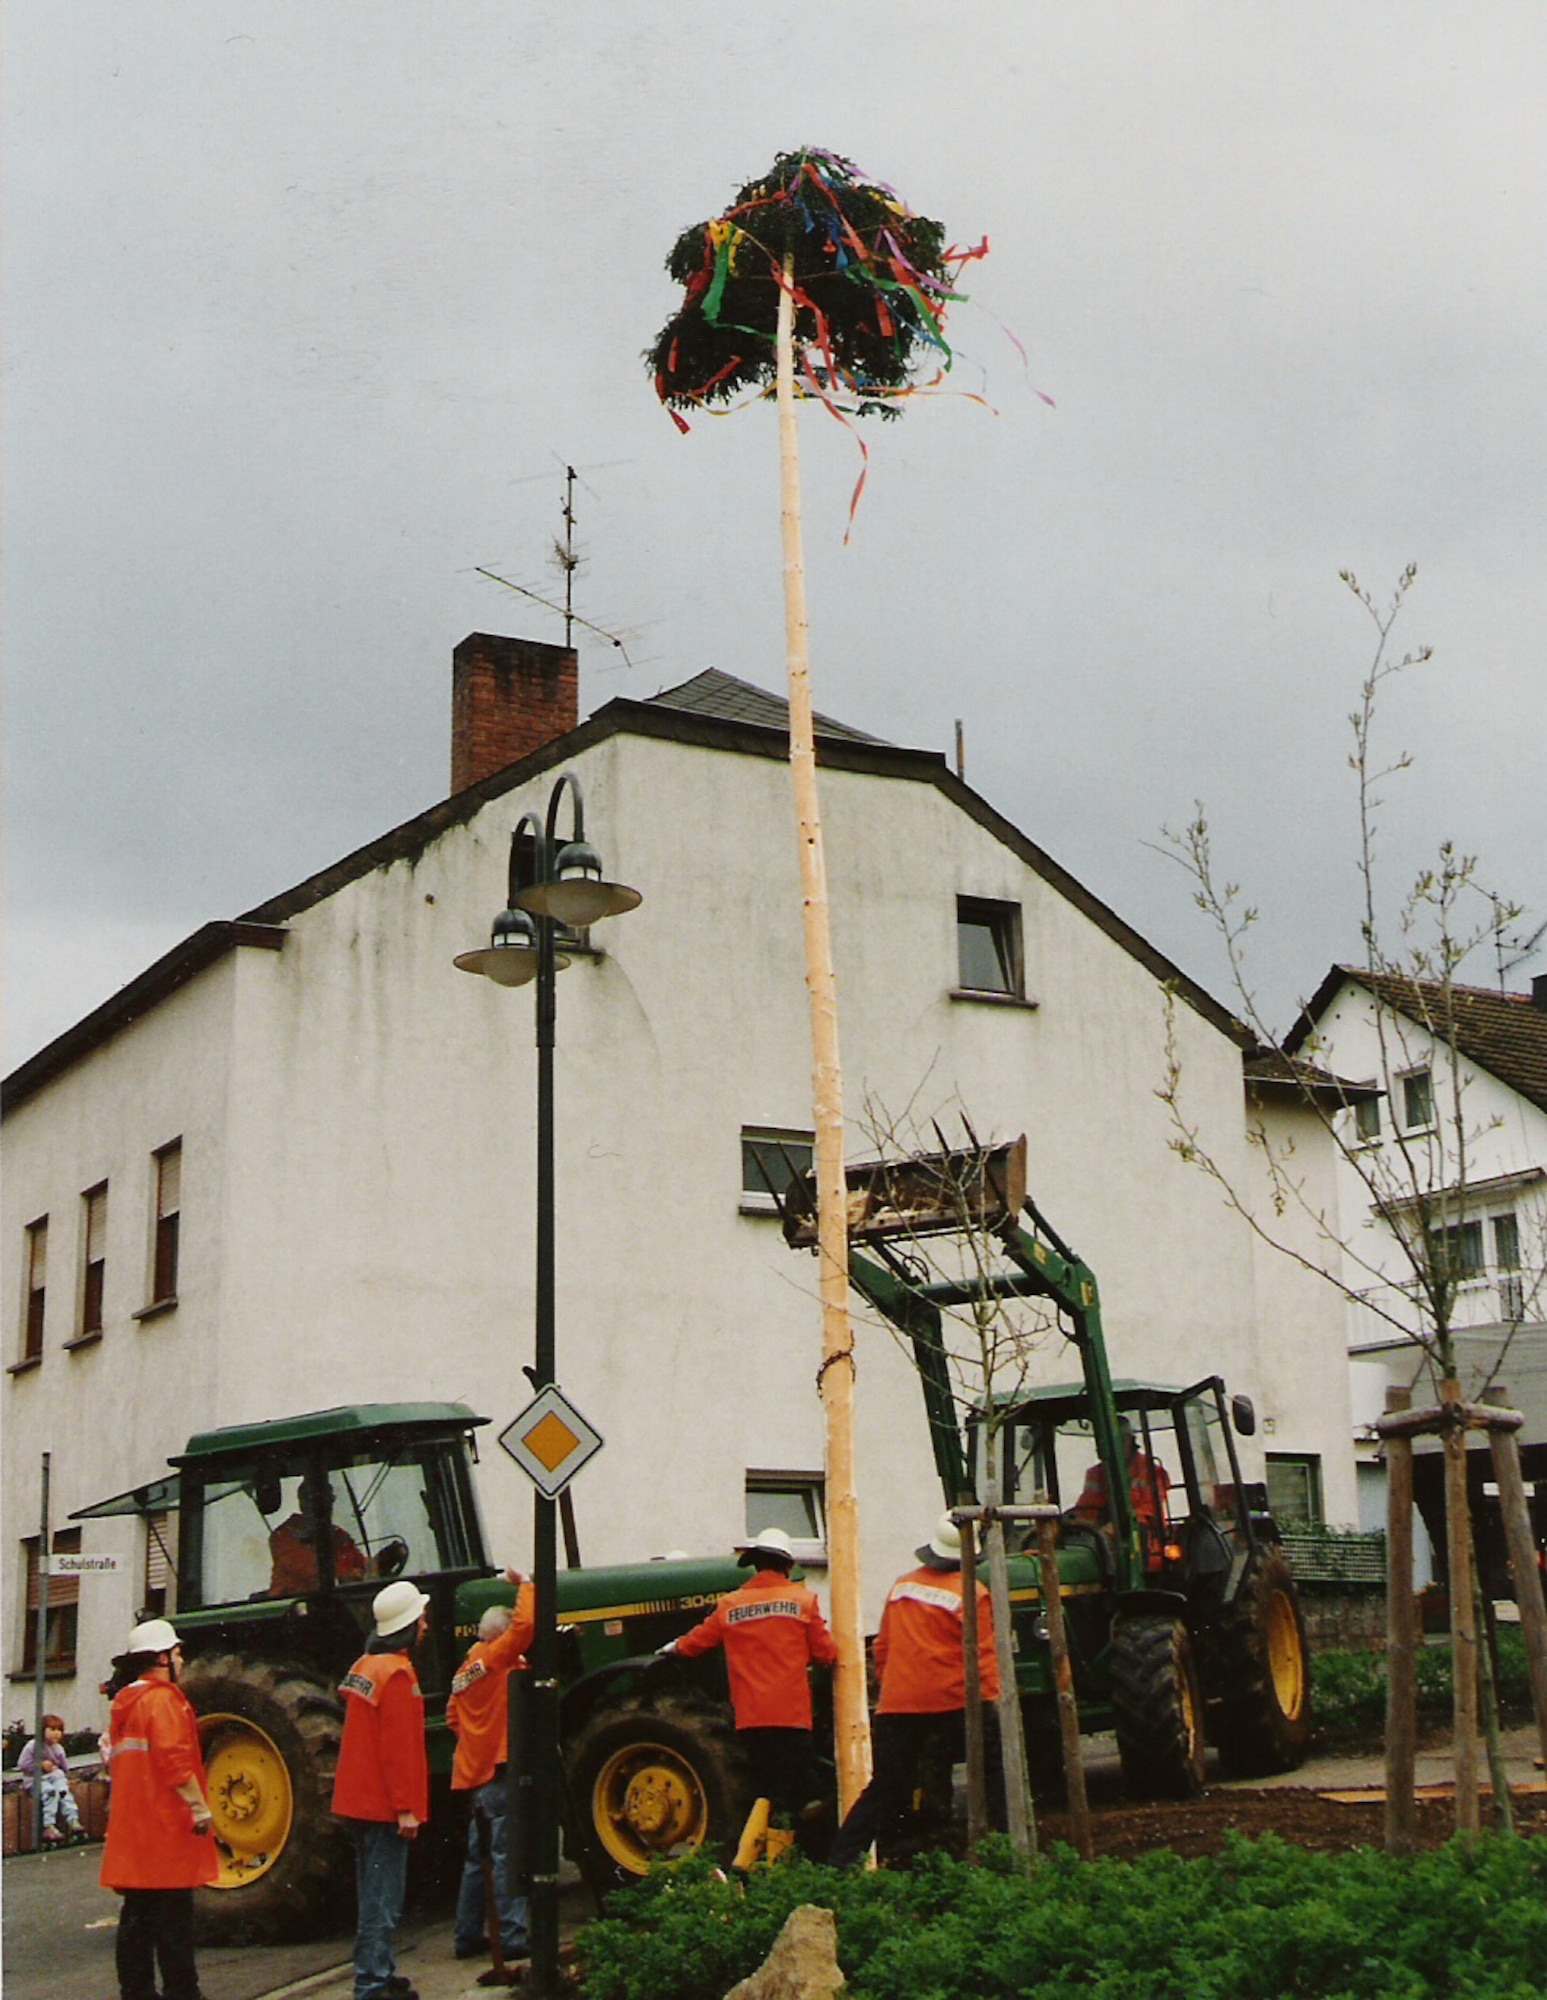 FLIESSEM, Germany --- Local fire fighters set up a May tree in the community of Fliessem, near Bitburg, a day prior to  German Labor Day, which is May 1. The youngsters will guard it around the clock to make sure neighbouring villagers don’t steal it. Traditionally, the May tree is a symbol of freedom. (Photo by Iris Reiff) 